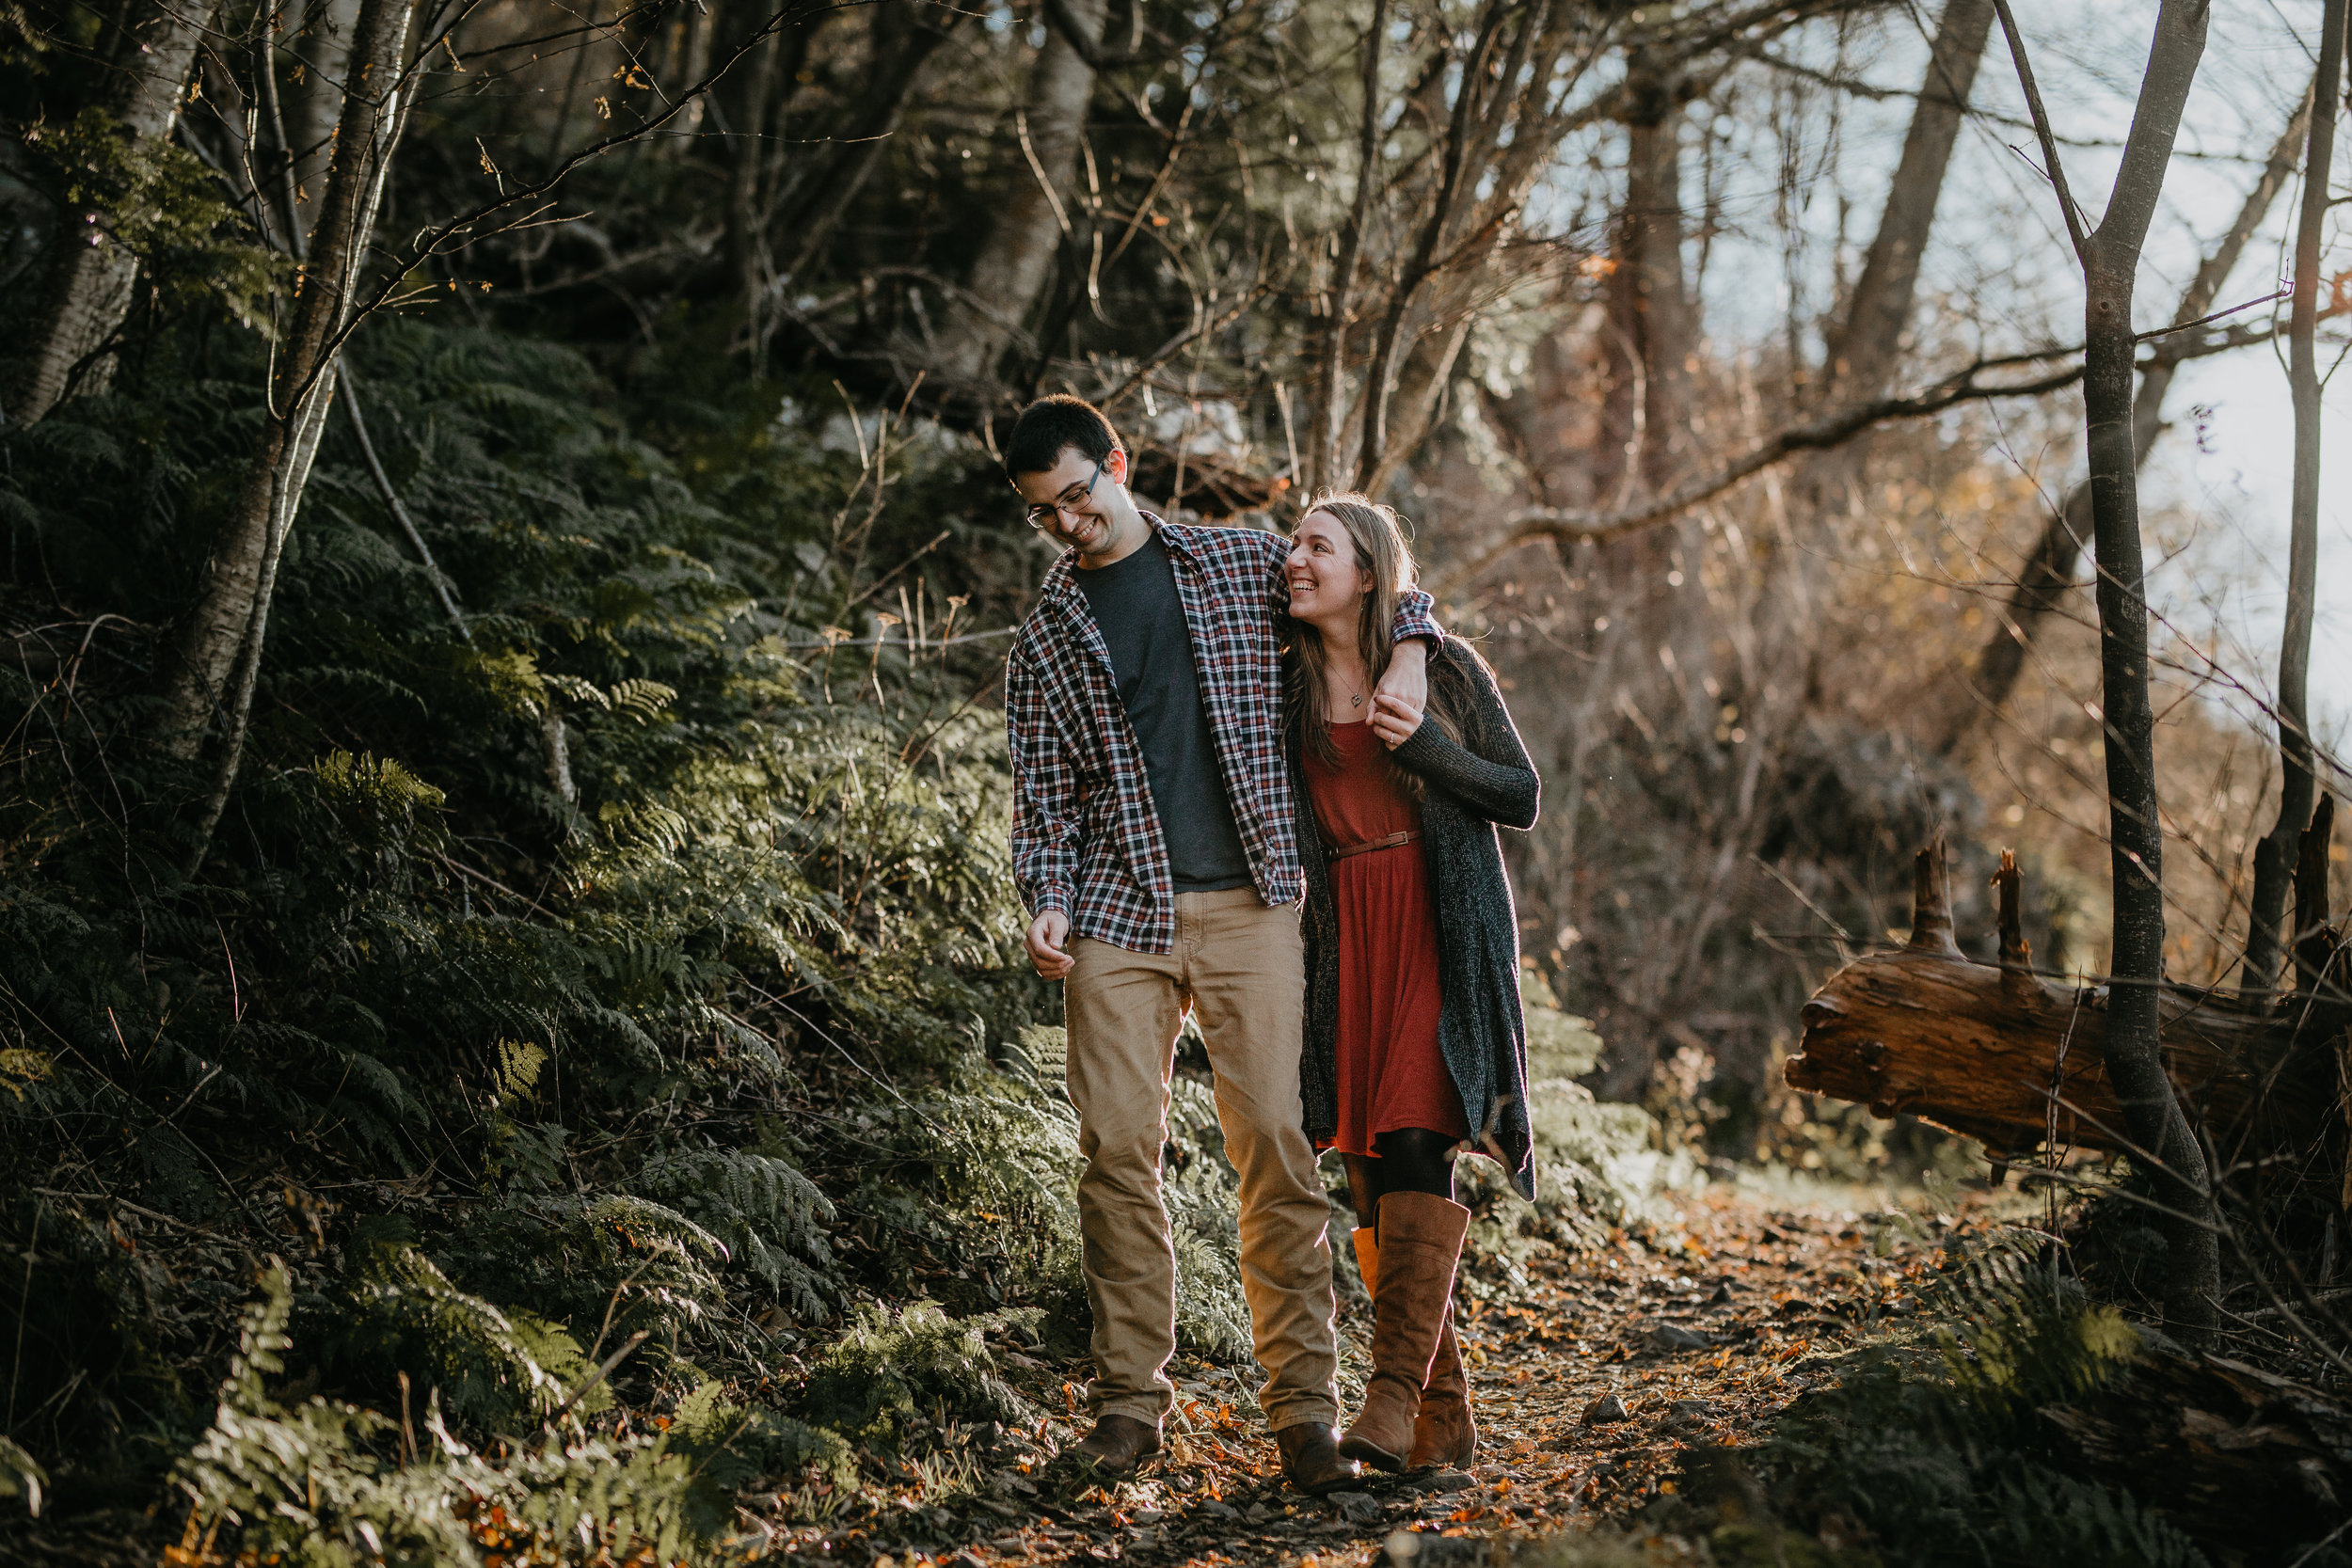 nicole-daacke-photography-shenandoah-national-park-adventure-engagement-session-with-fall-foliage-shenandoah-elopement-photographer-engagement-photos-in-virginia-charlottesville-national-park-adventure-elopement-photographer-3661.jpg